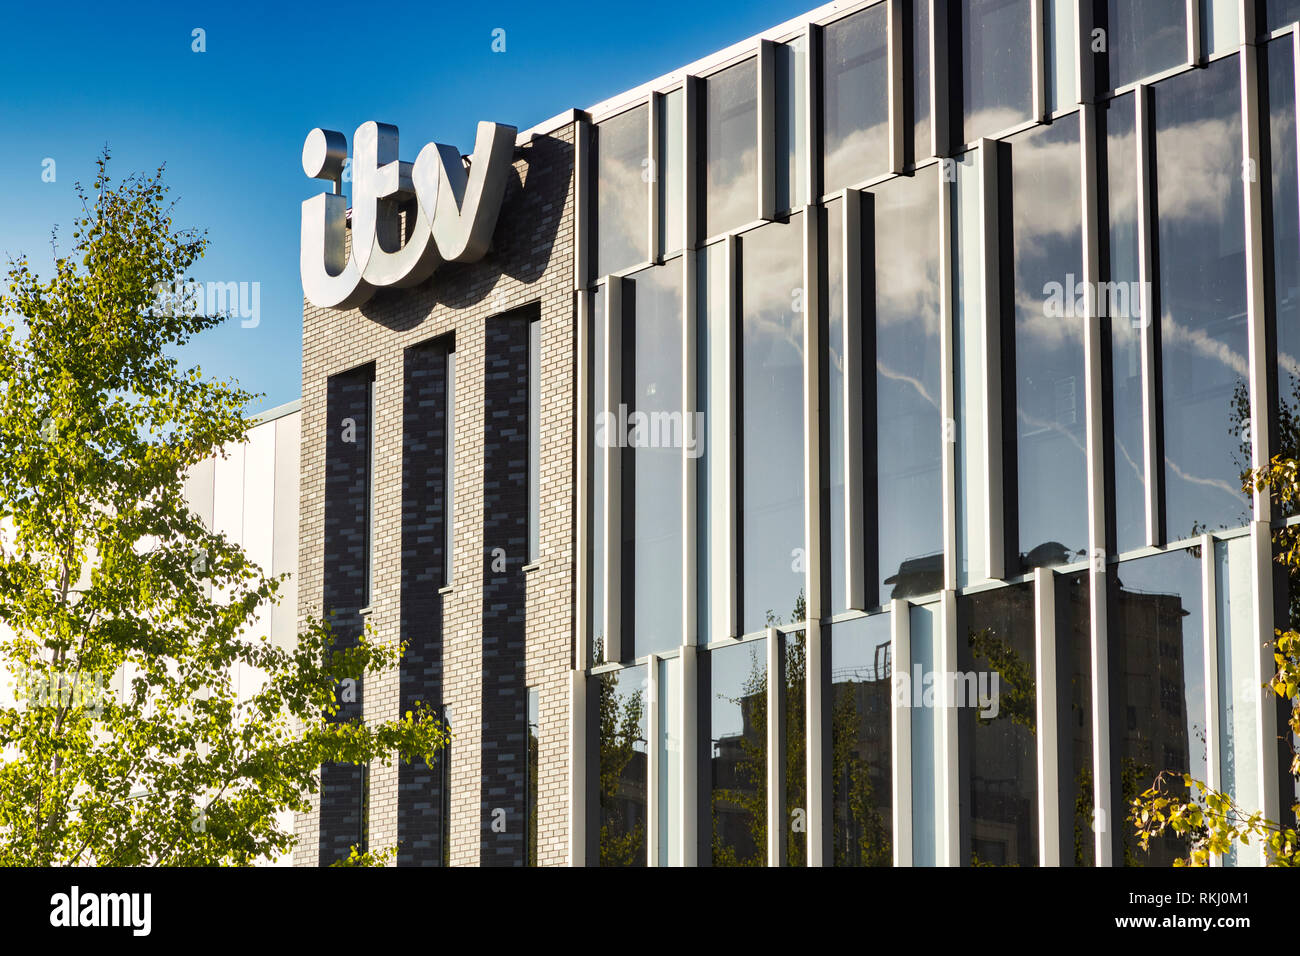 2 November 2018: Salford Quays, Manchester, UK - ITV building with logo, beautiful autumn day with clear blue sky, bright foliage. Stock Photo